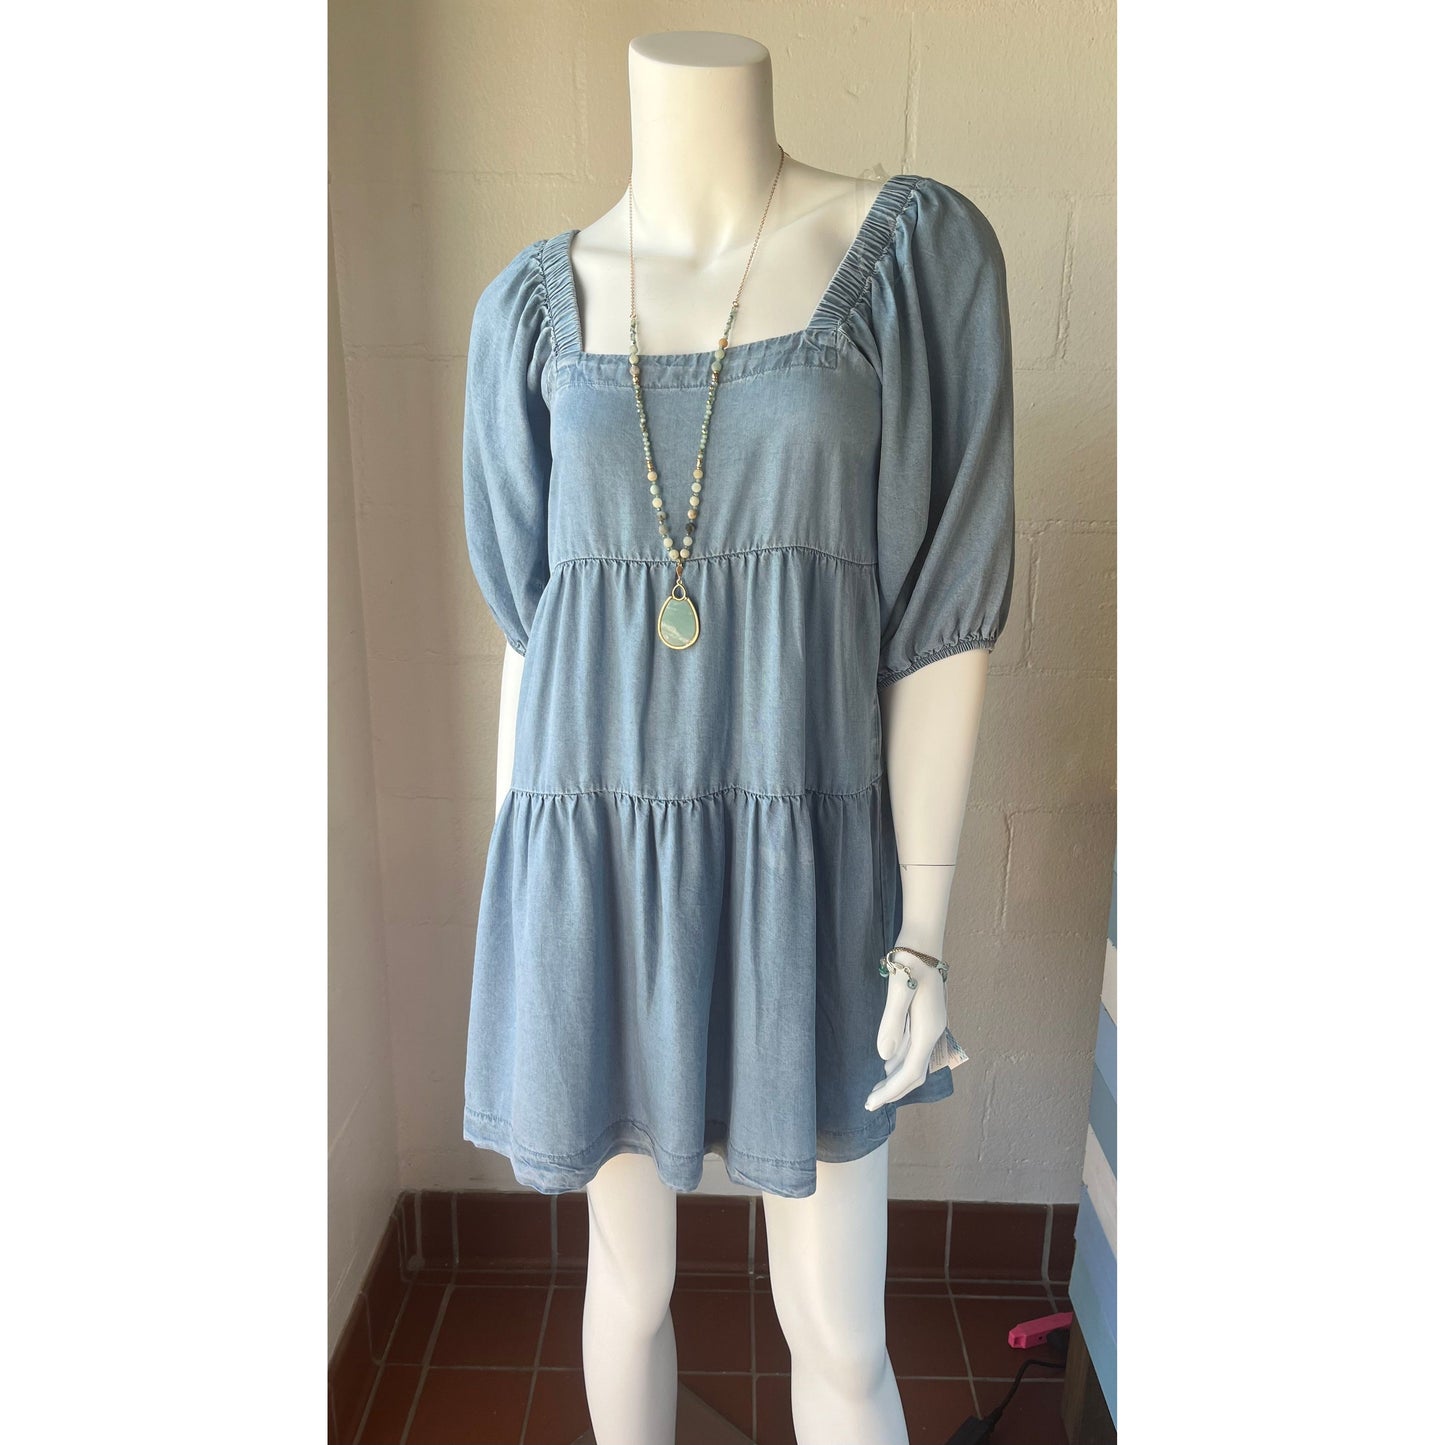 Denim Tencel Tiered Dress with Puff Sleeves by Hunter Brown.  Available in sizes X-Small through Large.  100% Lyocell